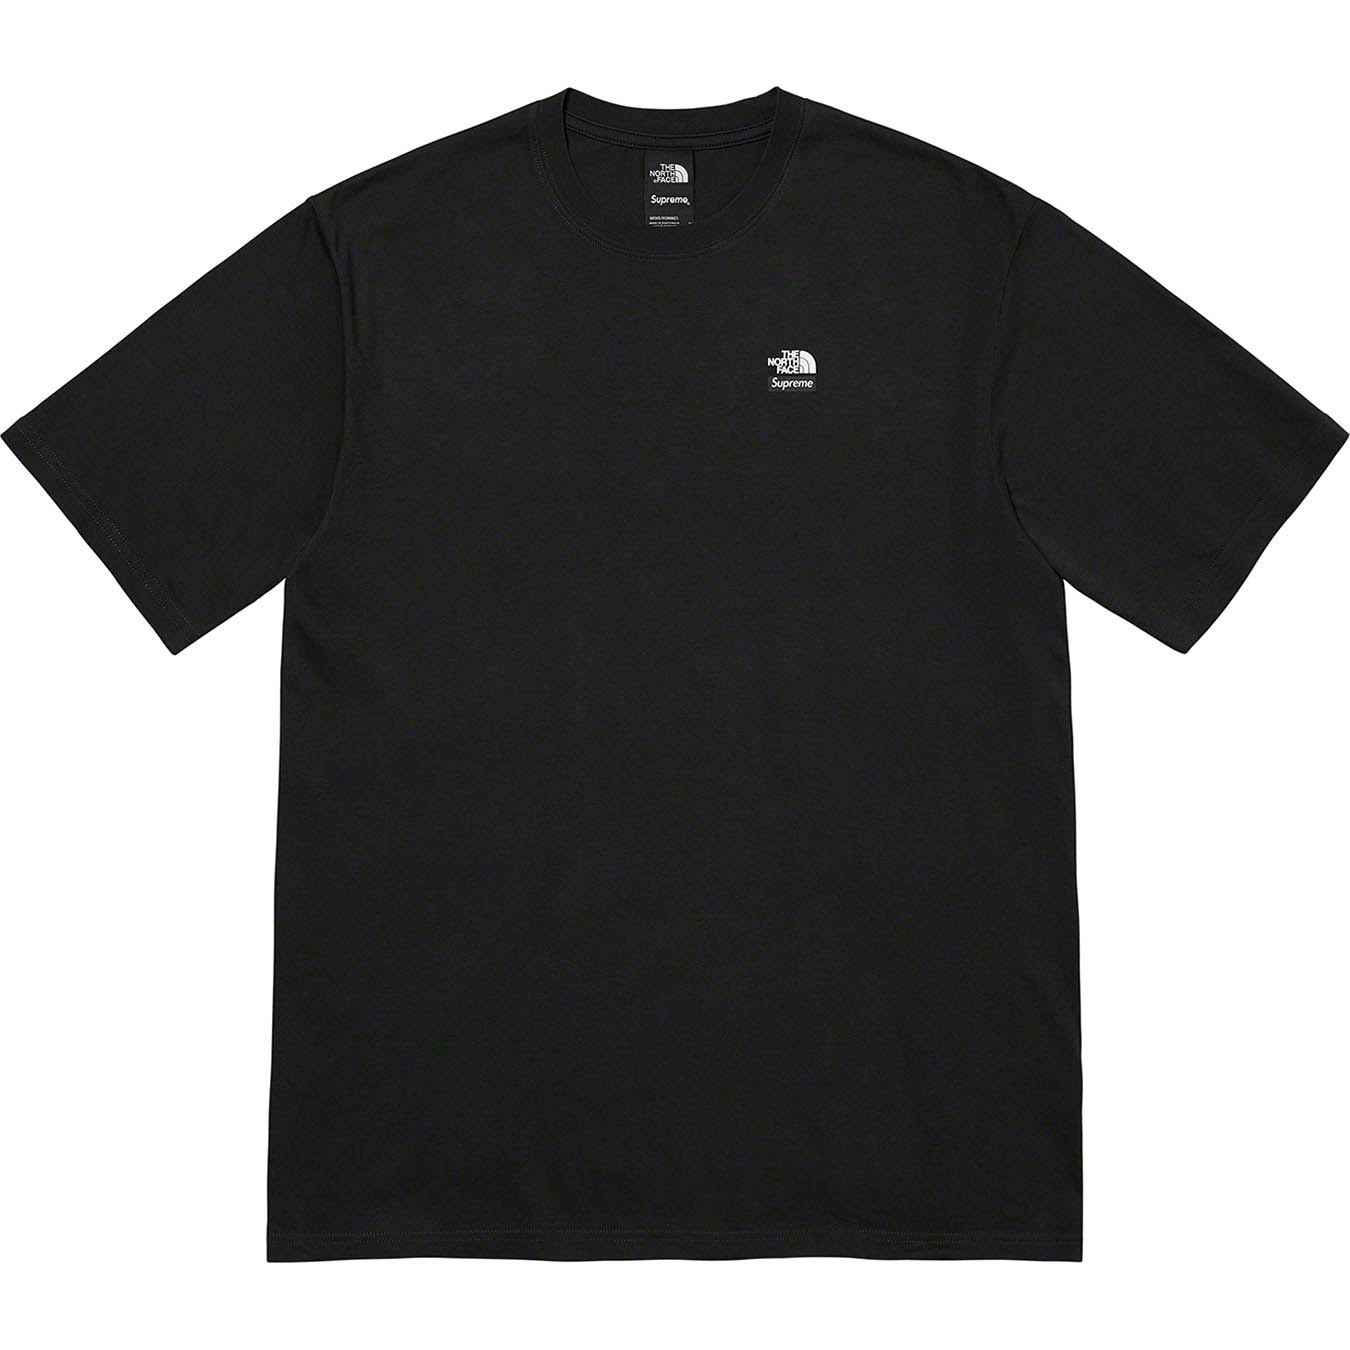 Supreme®/The North Face® Mountains Tee